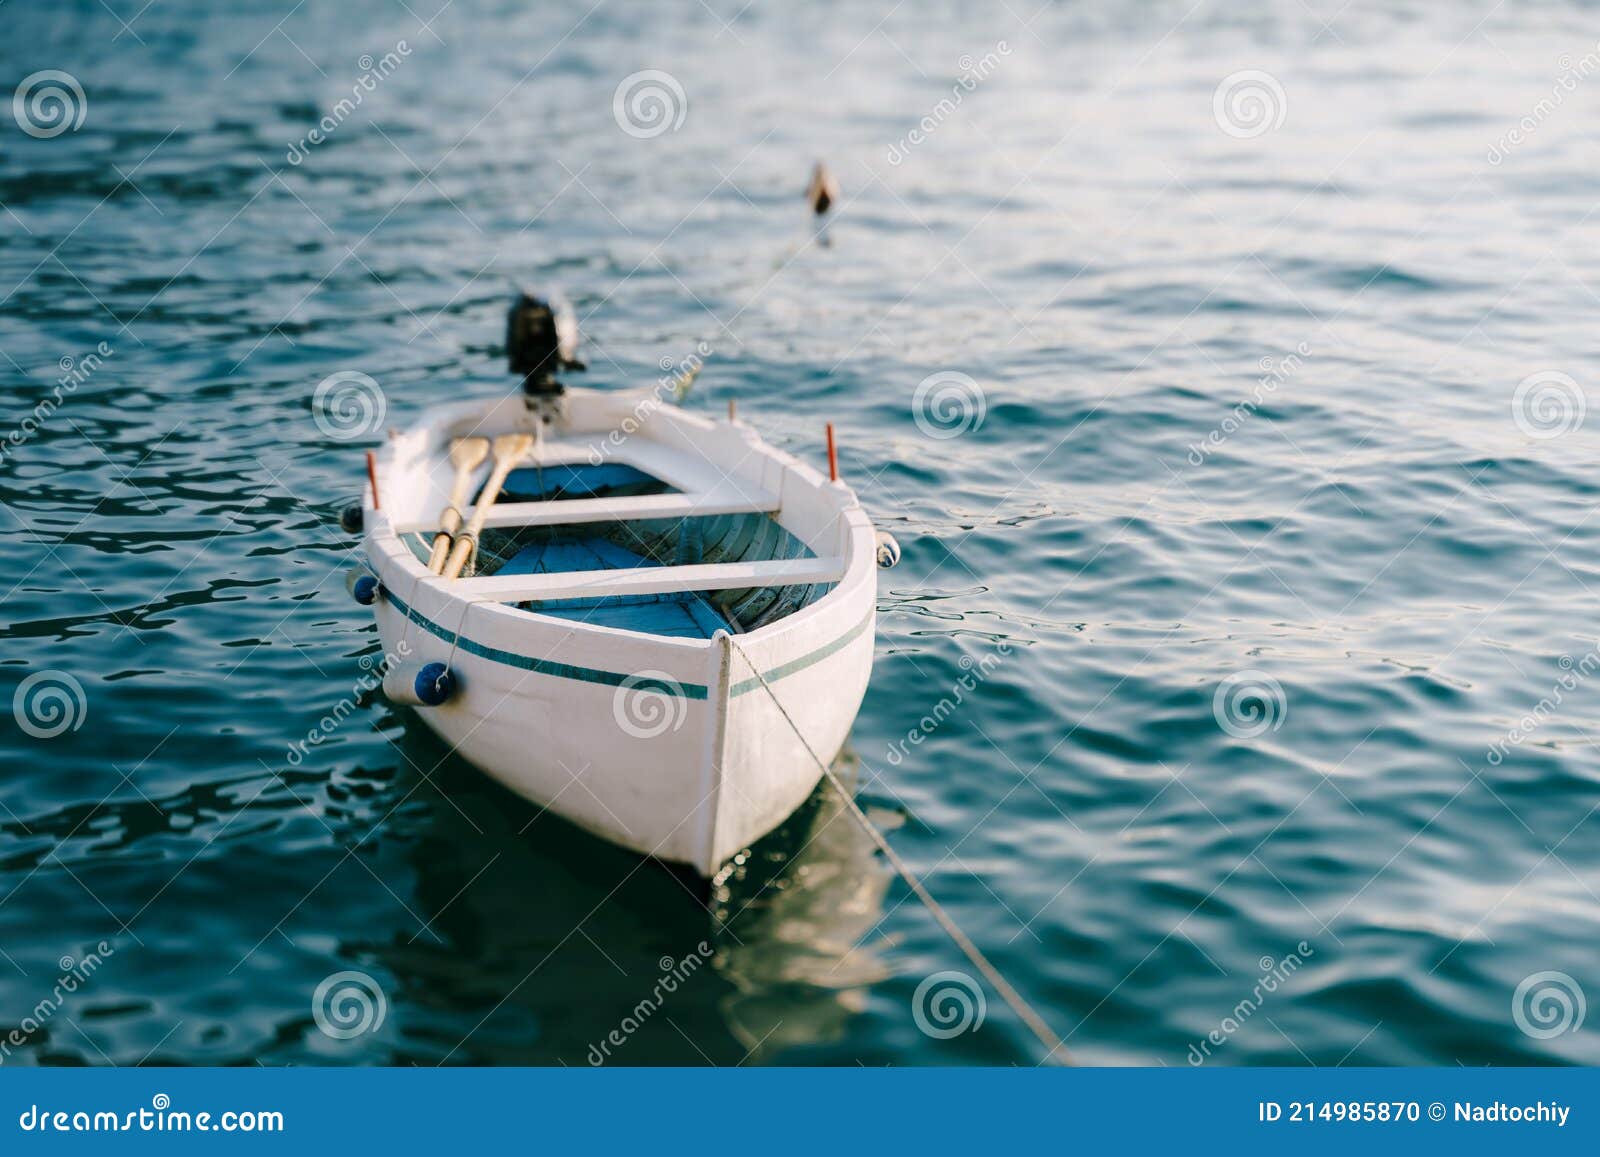 White Wooden Fishing Boat with Oars and Motor. Stock Photo - Image